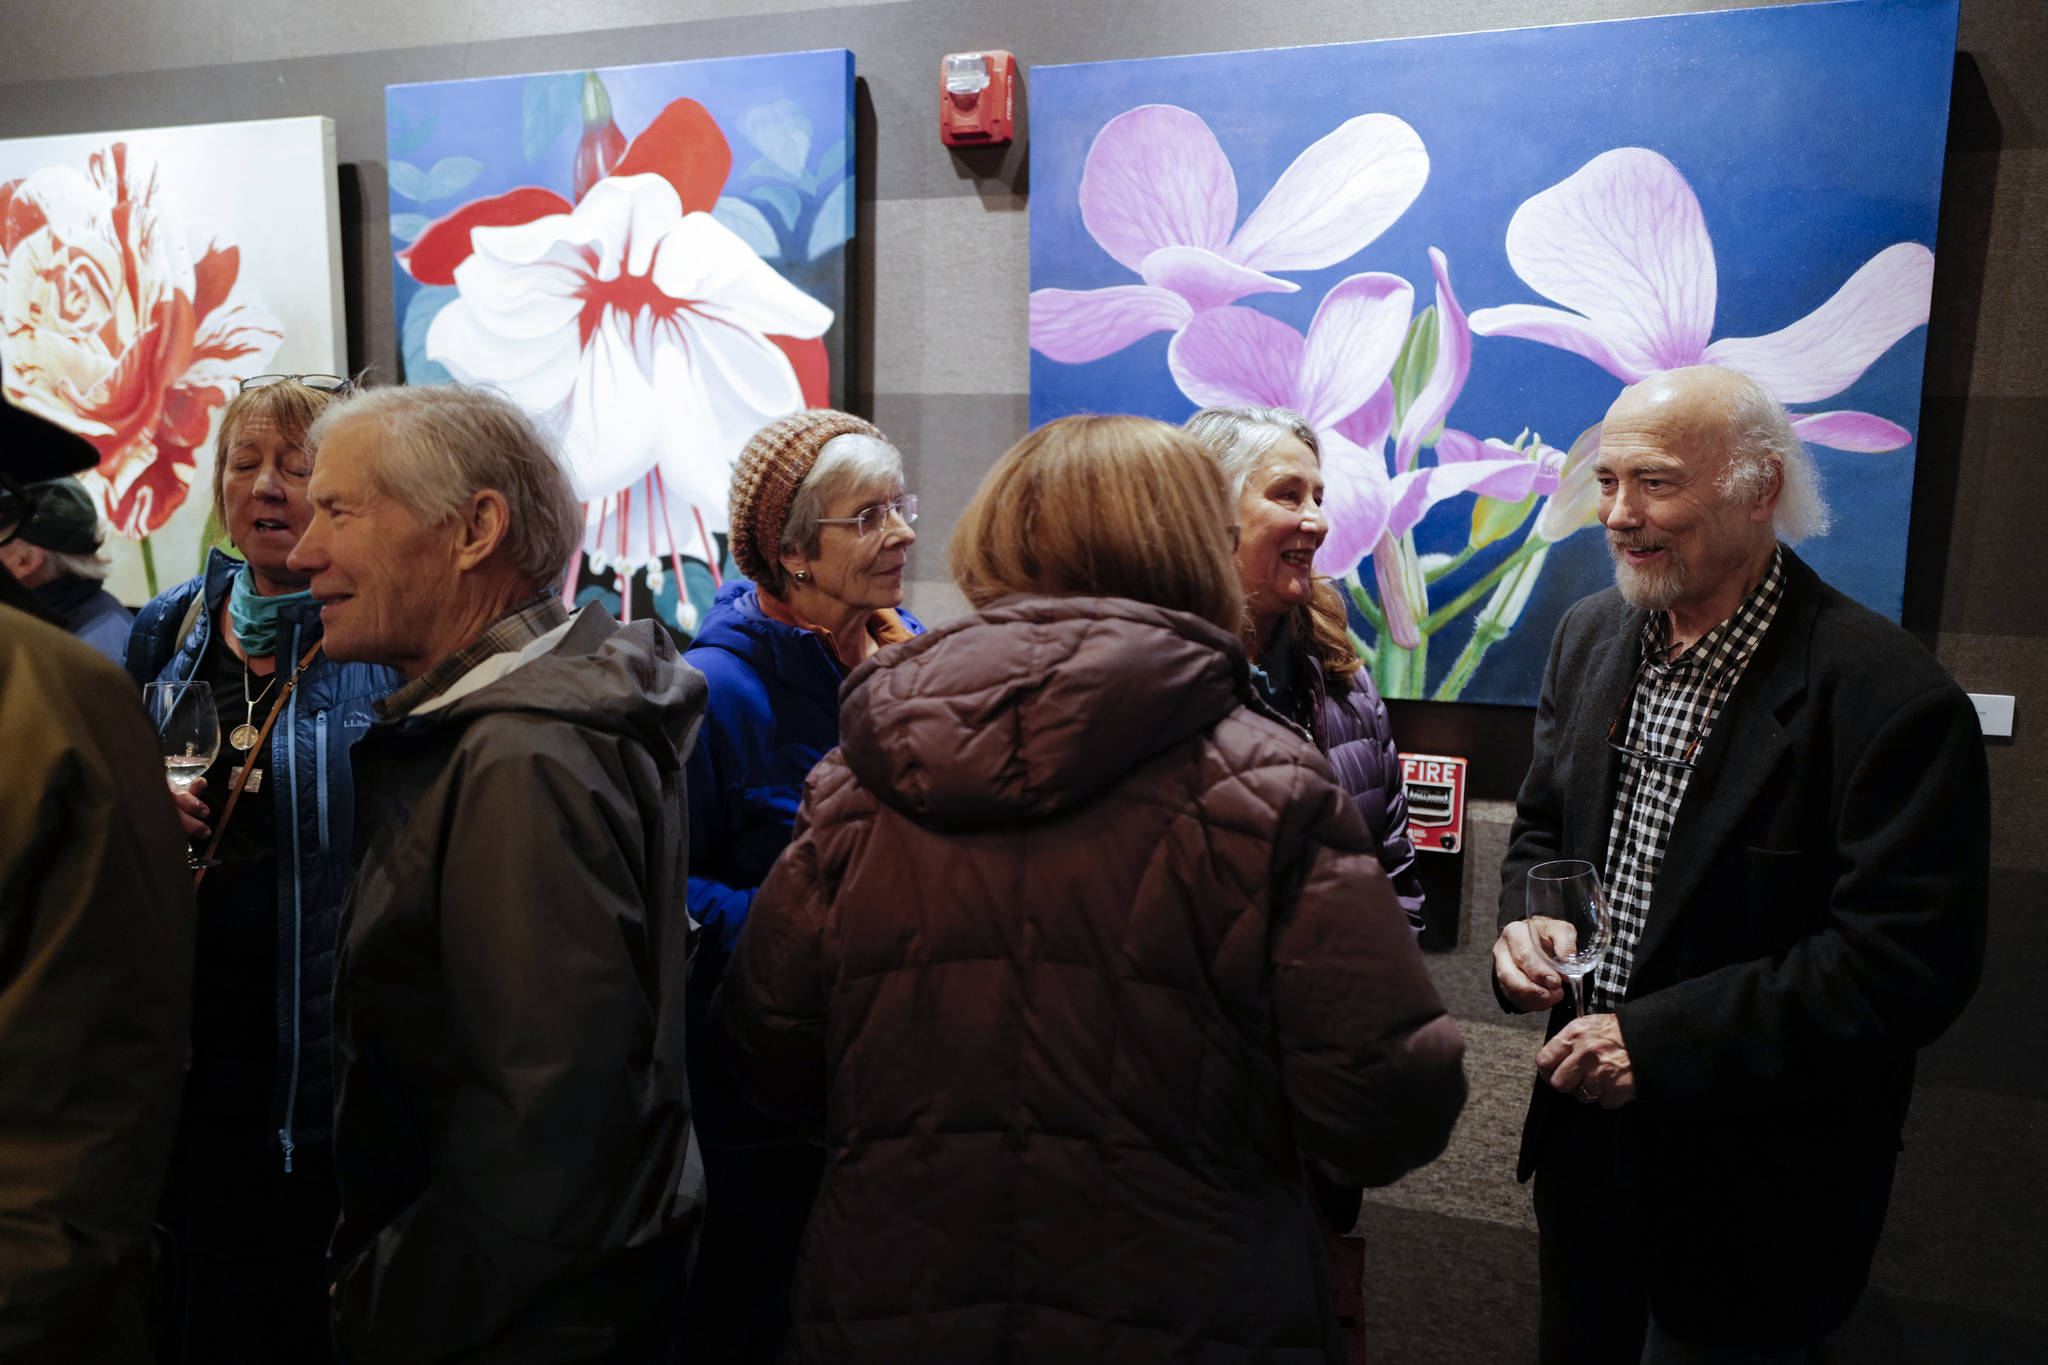 Dan DeRoux, right, talks with visitors to his “Power Flowers” exhibit at Salt during Gallery Walk on Friday, Dec. 6, 2019. (Michael Penn | Juneau Empire)